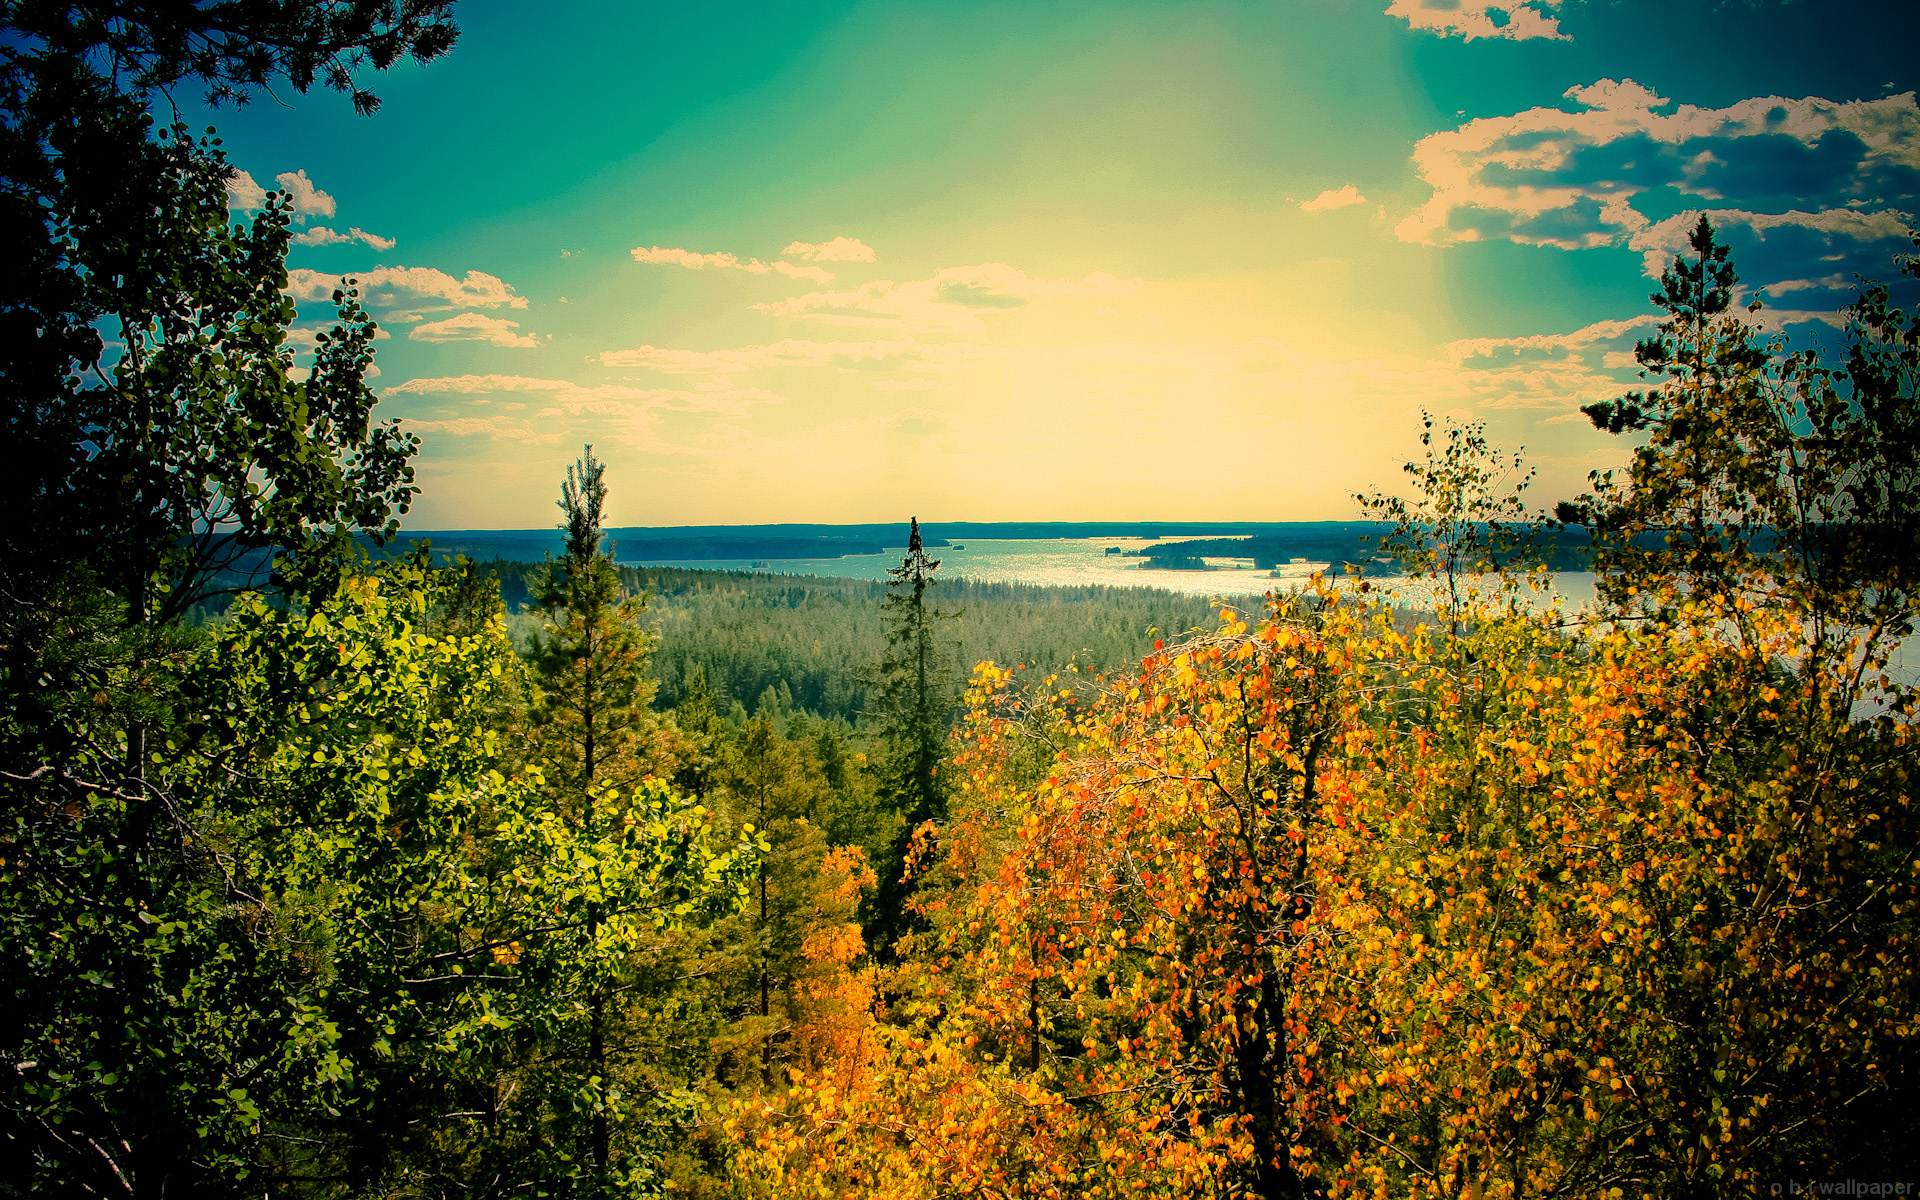 Finland: The country became a part of Sweden from the late 13th century. 1920x1200 HD Wallpaper.